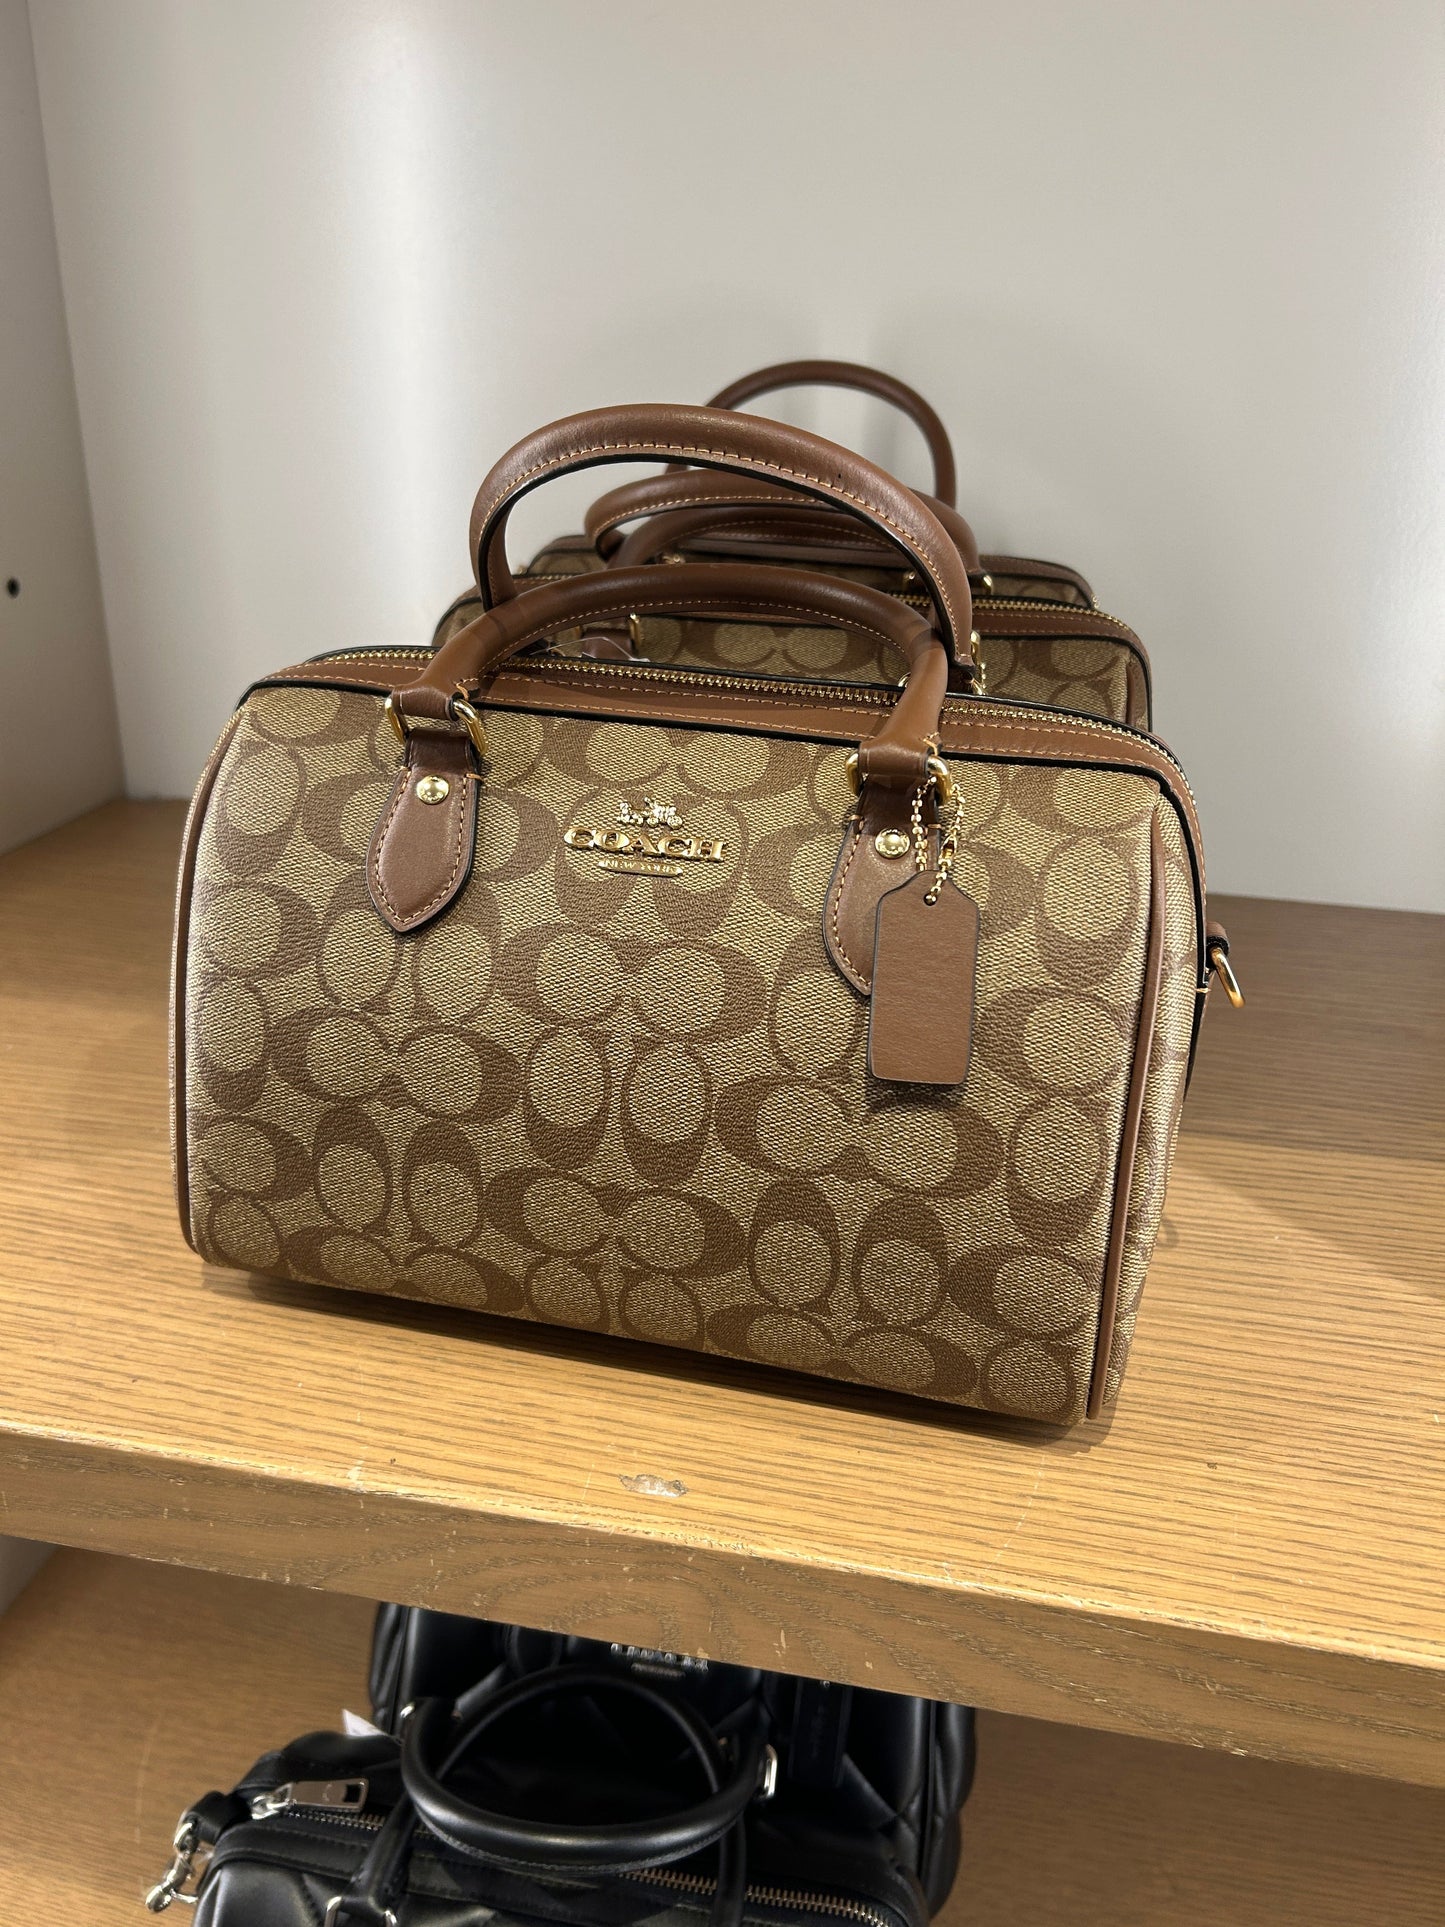 Load image into Gallery viewer, Coach New Rowan Satchel In Signature Khaki Saddle (Pre-order)
